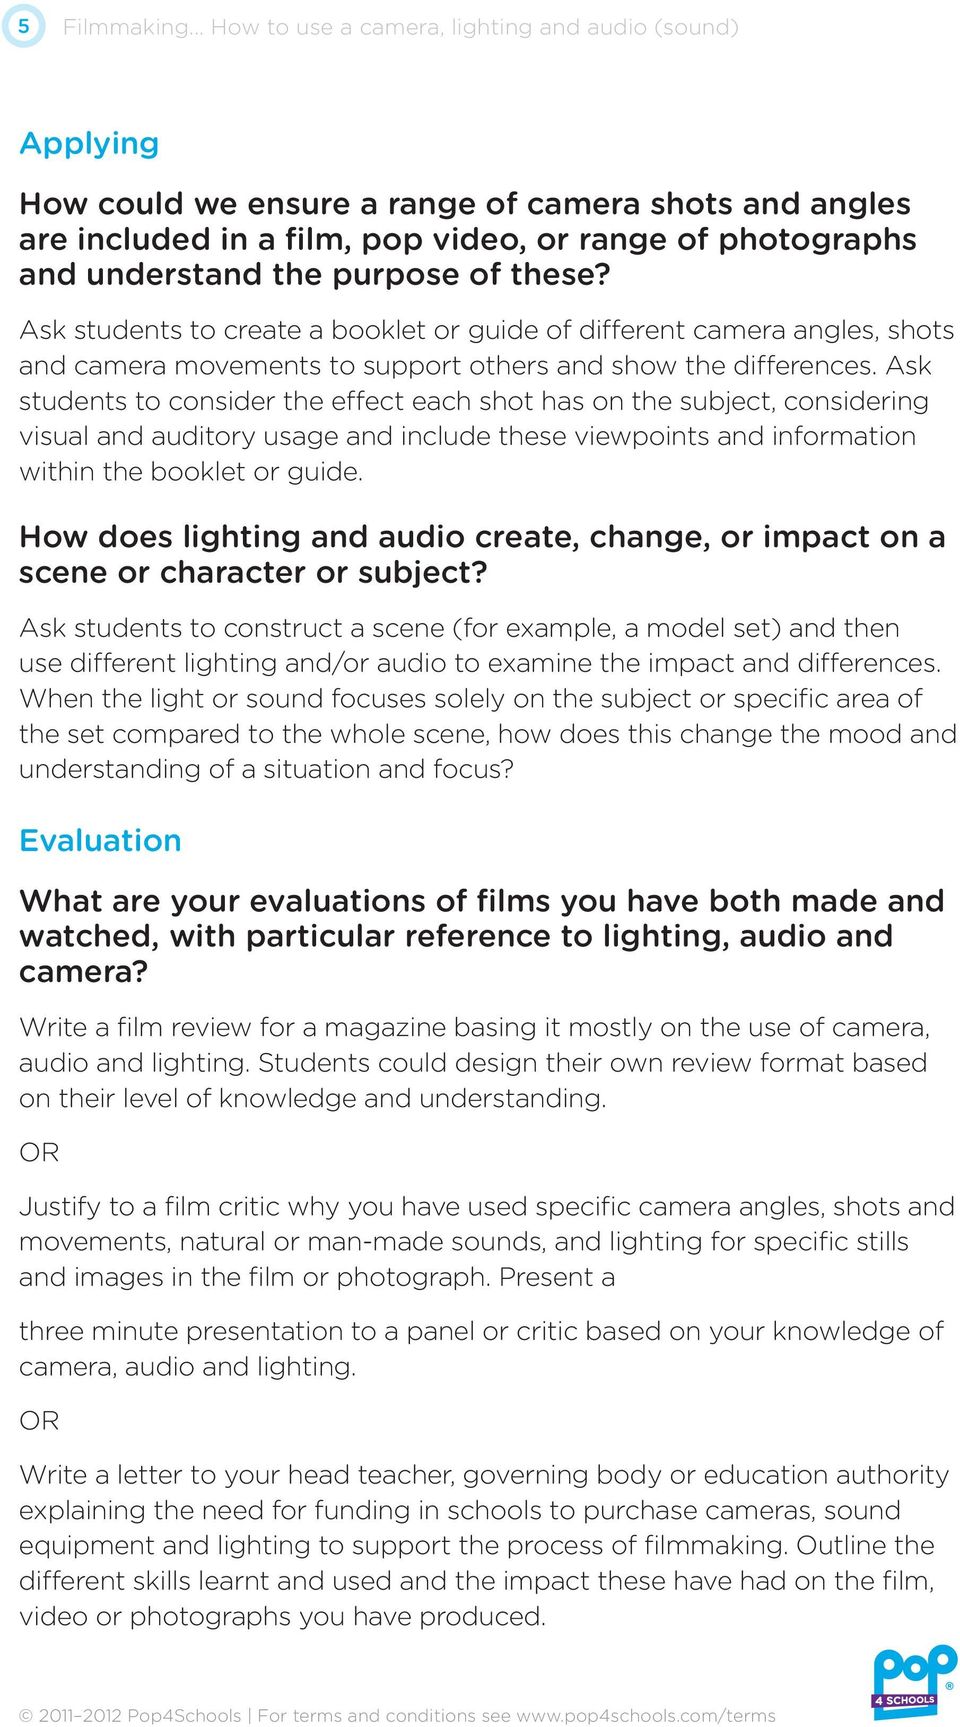 Ask students to consider the effect each shot has on the subject, considering visual and auditory usage and include these viewpoints and information within the booklet or guide.